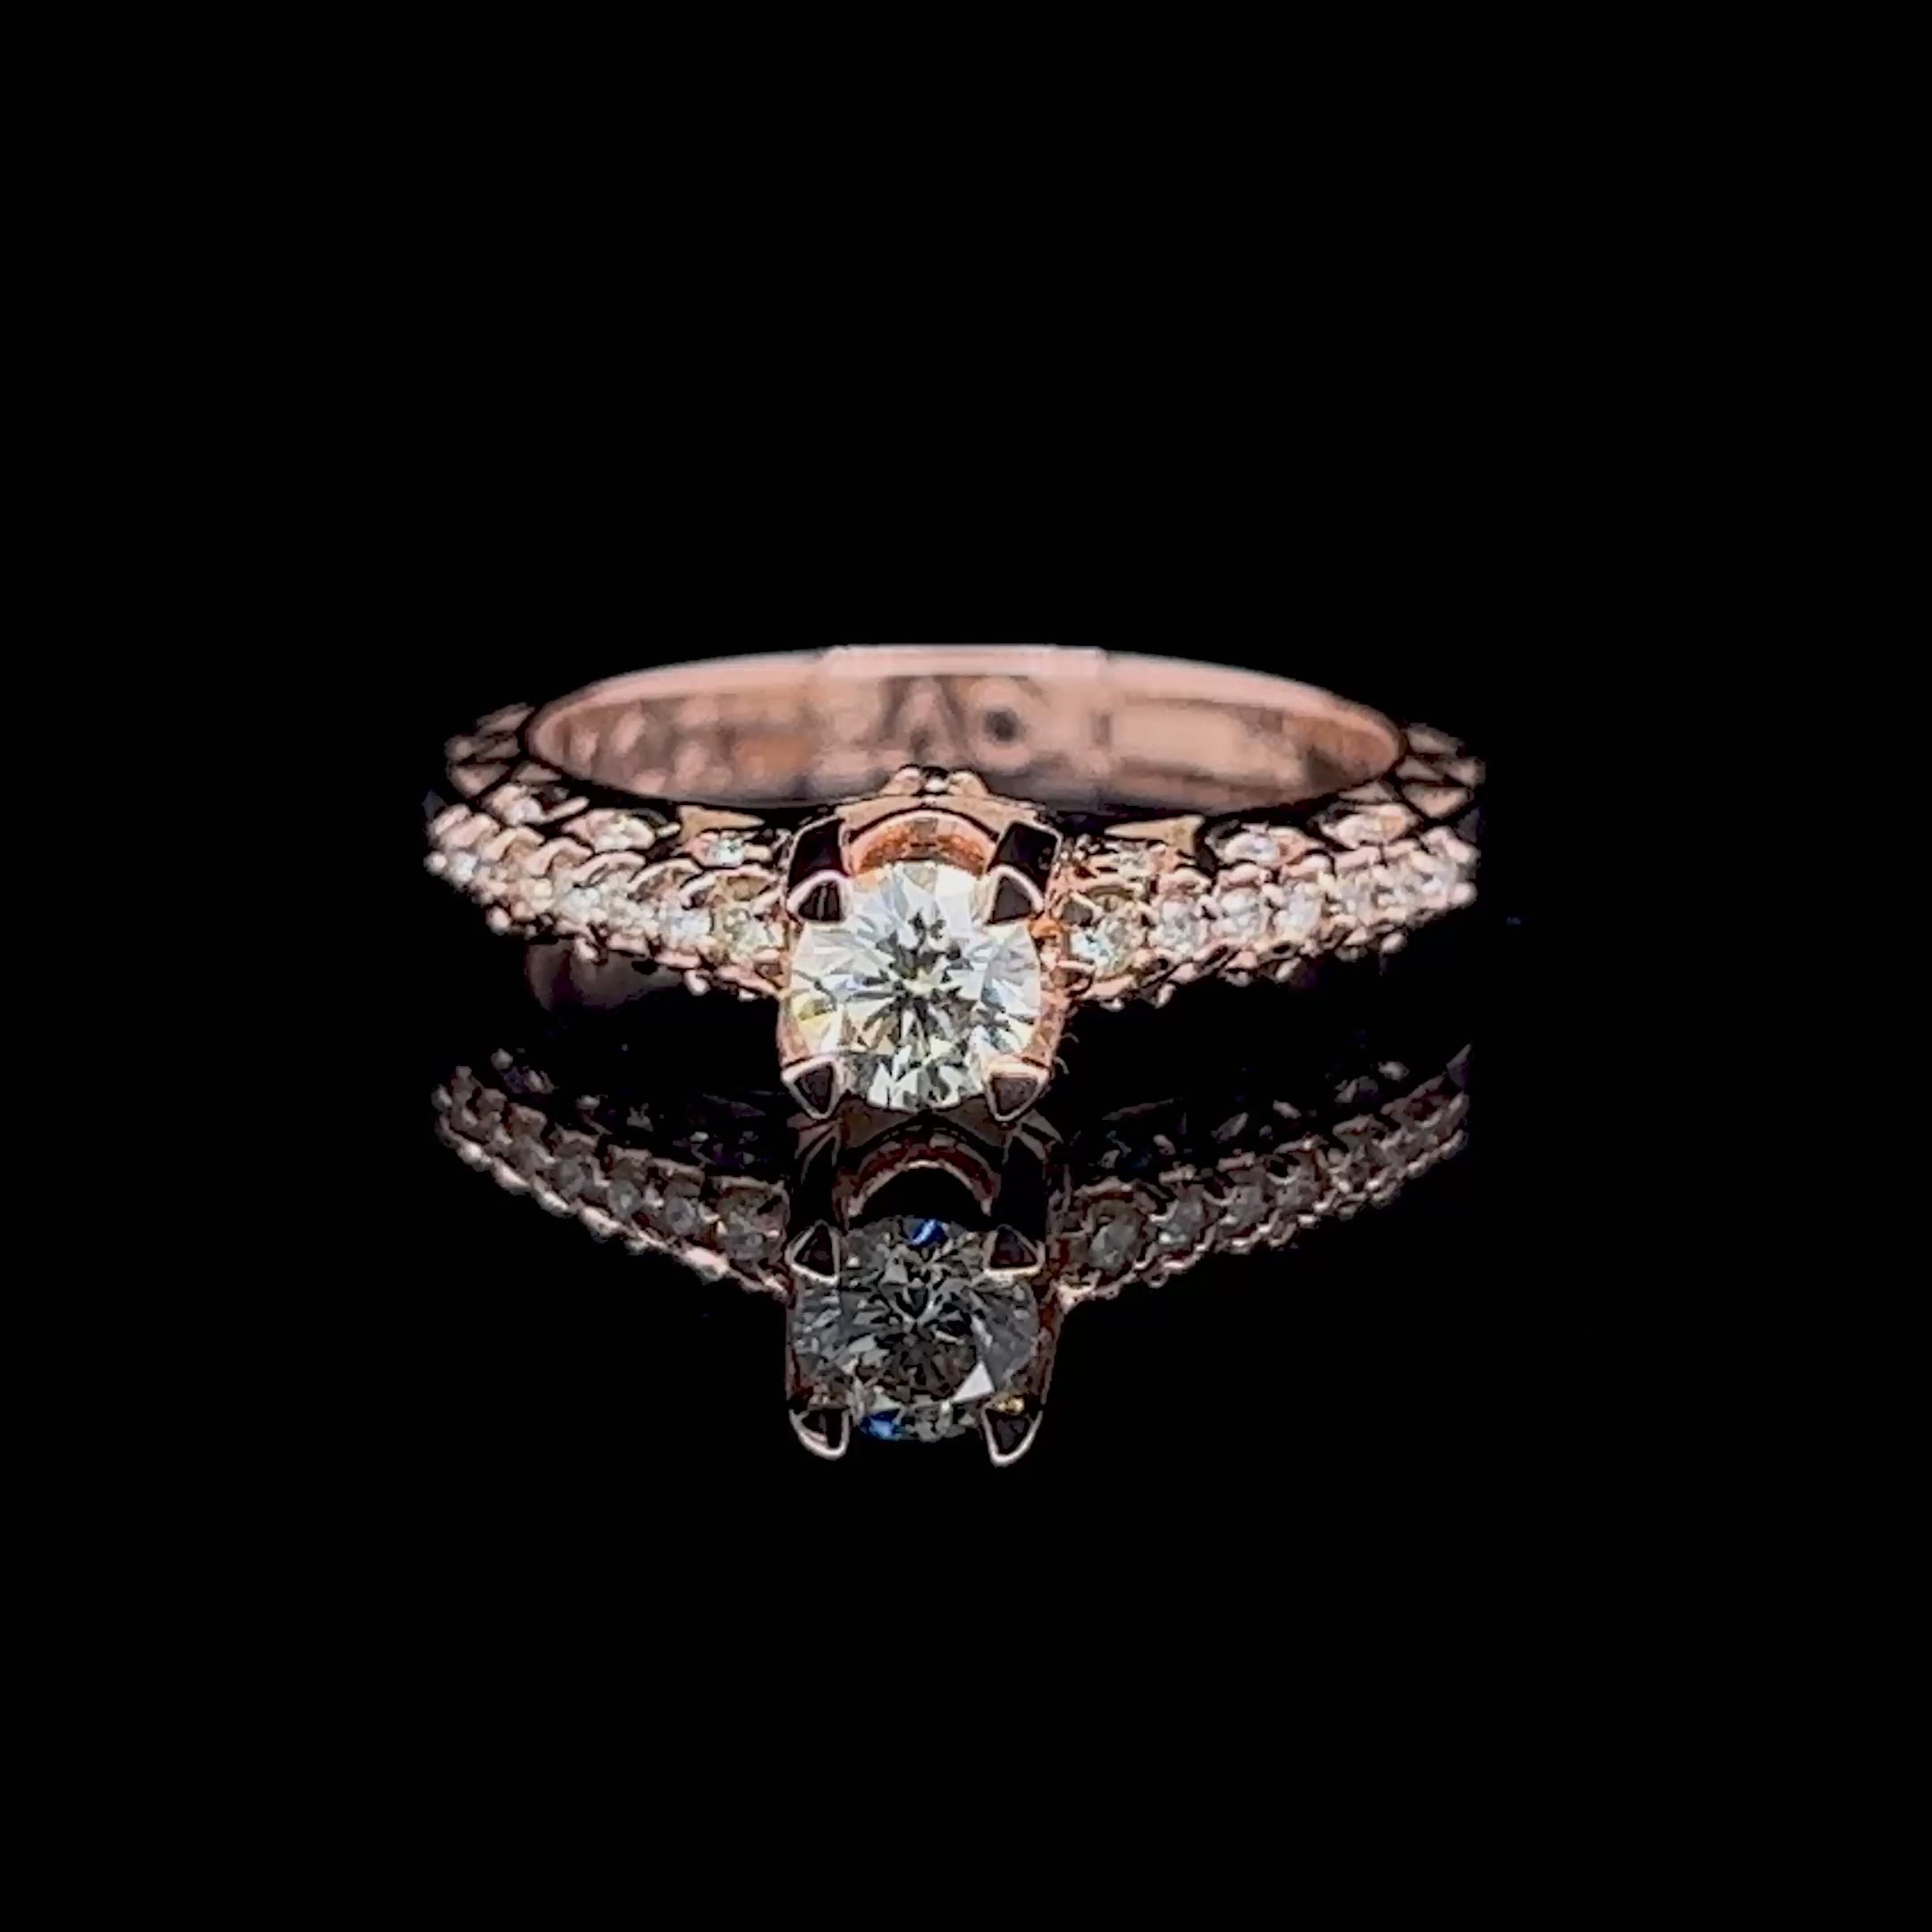 Limited 0.60 CT Round Cut Diamond Engagement Ring in 14K Rose Gold